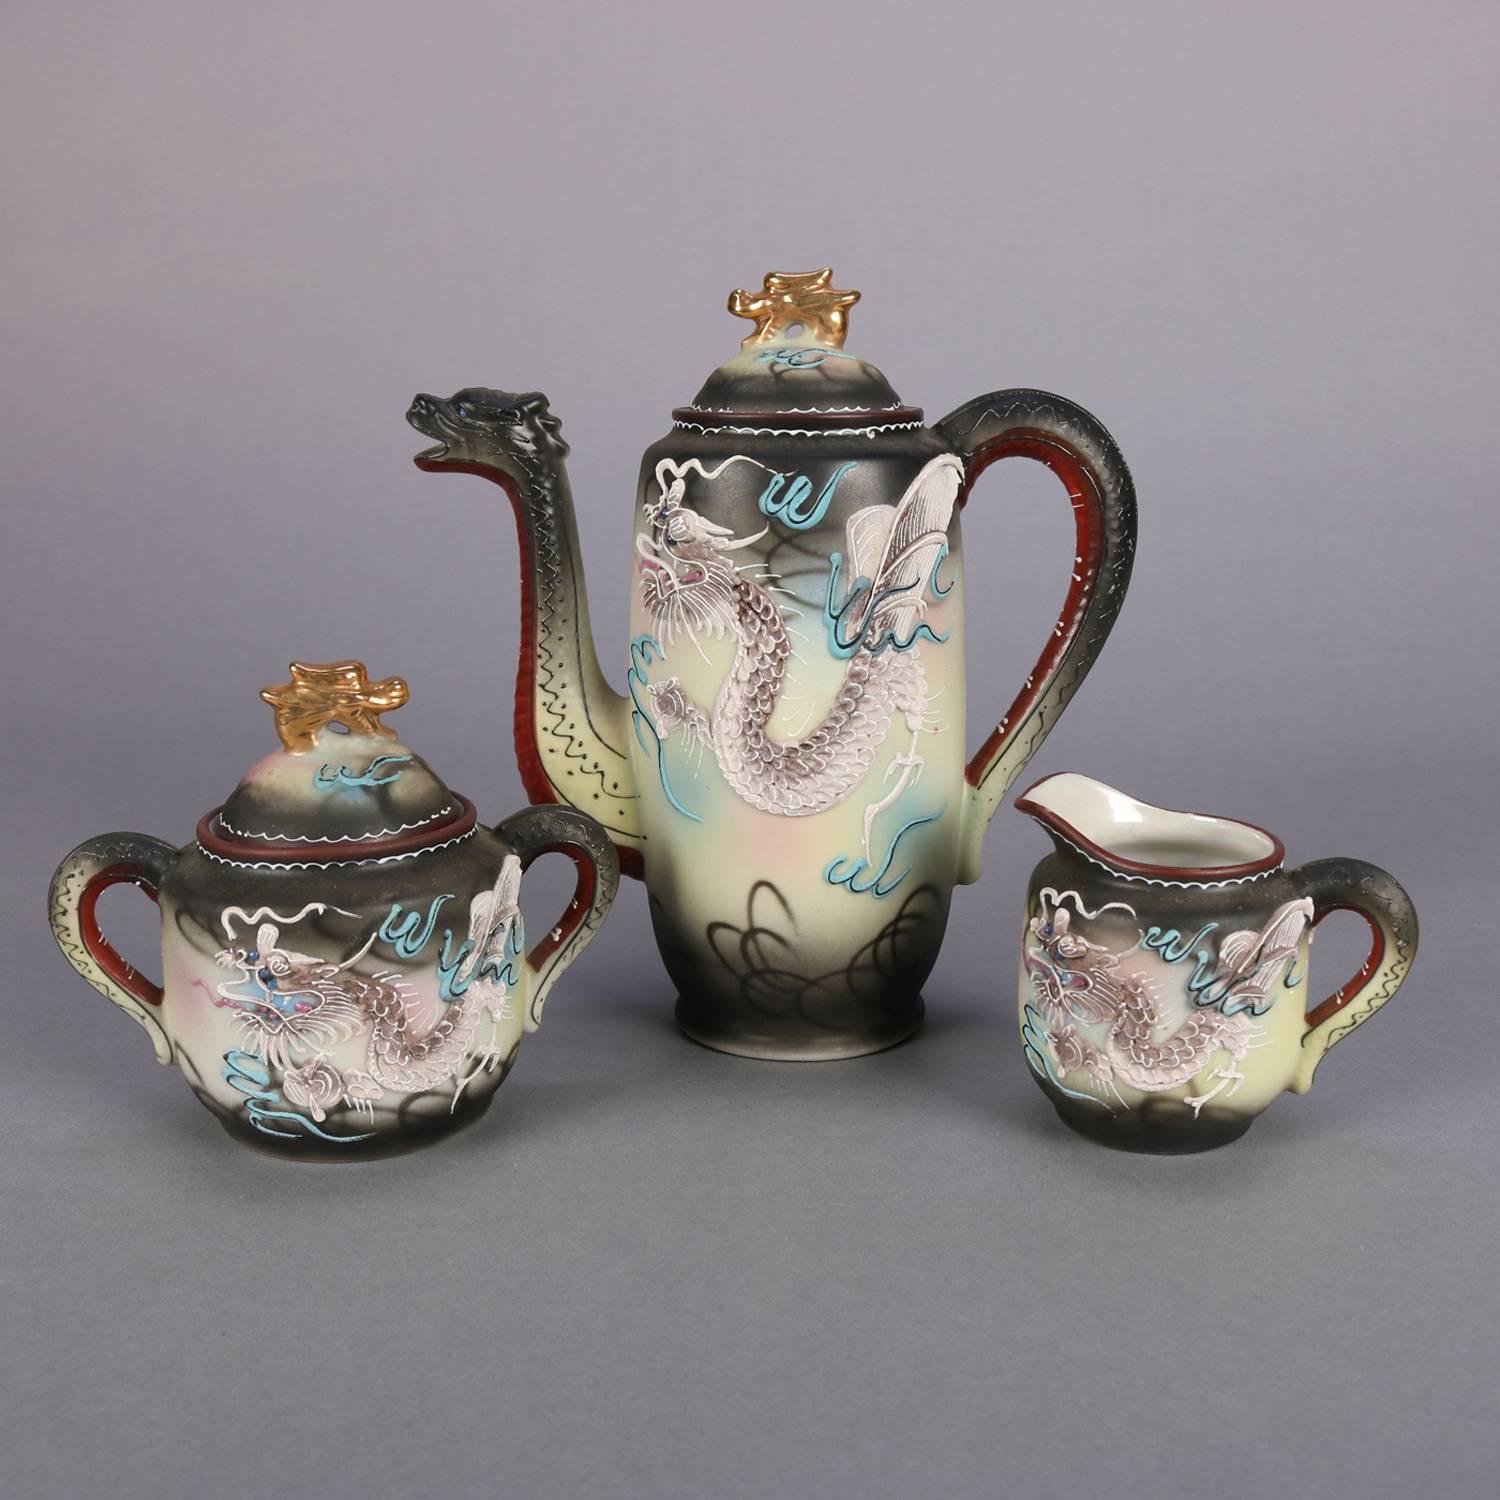 Japanese Nippon Dragon Ware tea set features hand painted moriage dragon decoration and gilt finials, set includes tea pot, creamer and covered sugar, six tea cups and saucers; stamped on bottom; 20th century

Measure: Teapot 8